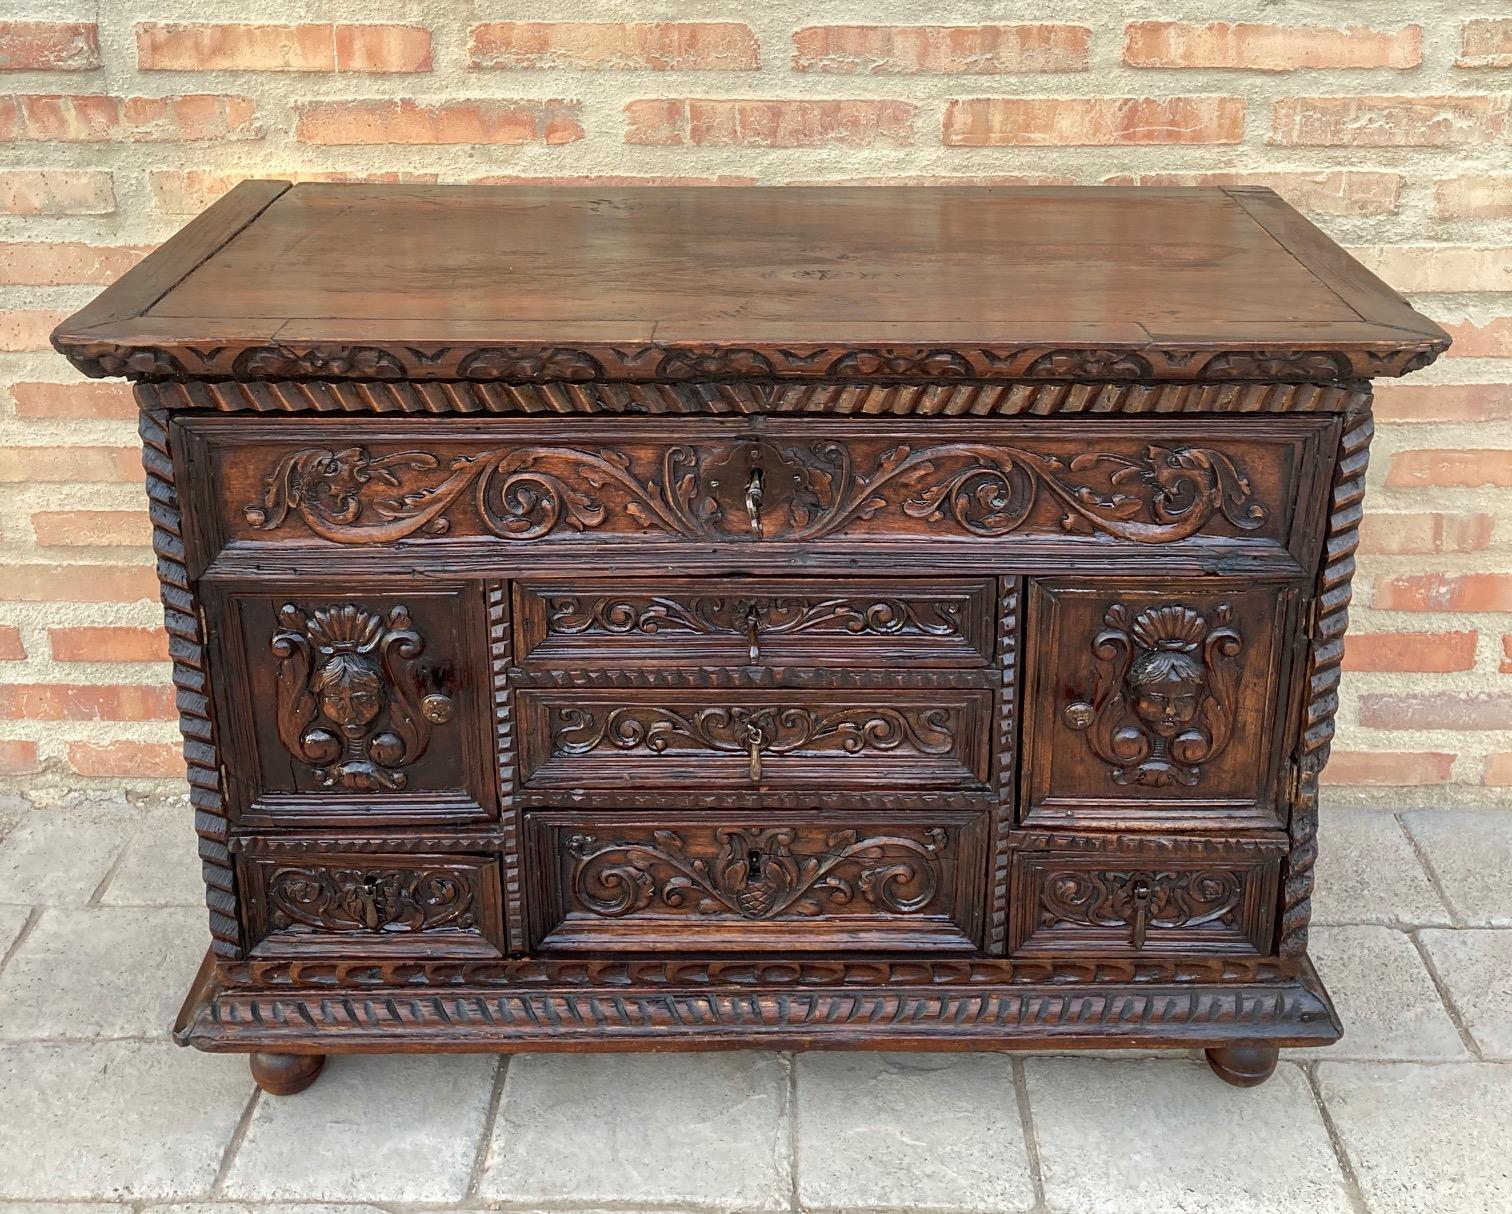 Baroque Spanish Renaissance Carved Walnut Cassone or Trunk, 19th Century For Sale